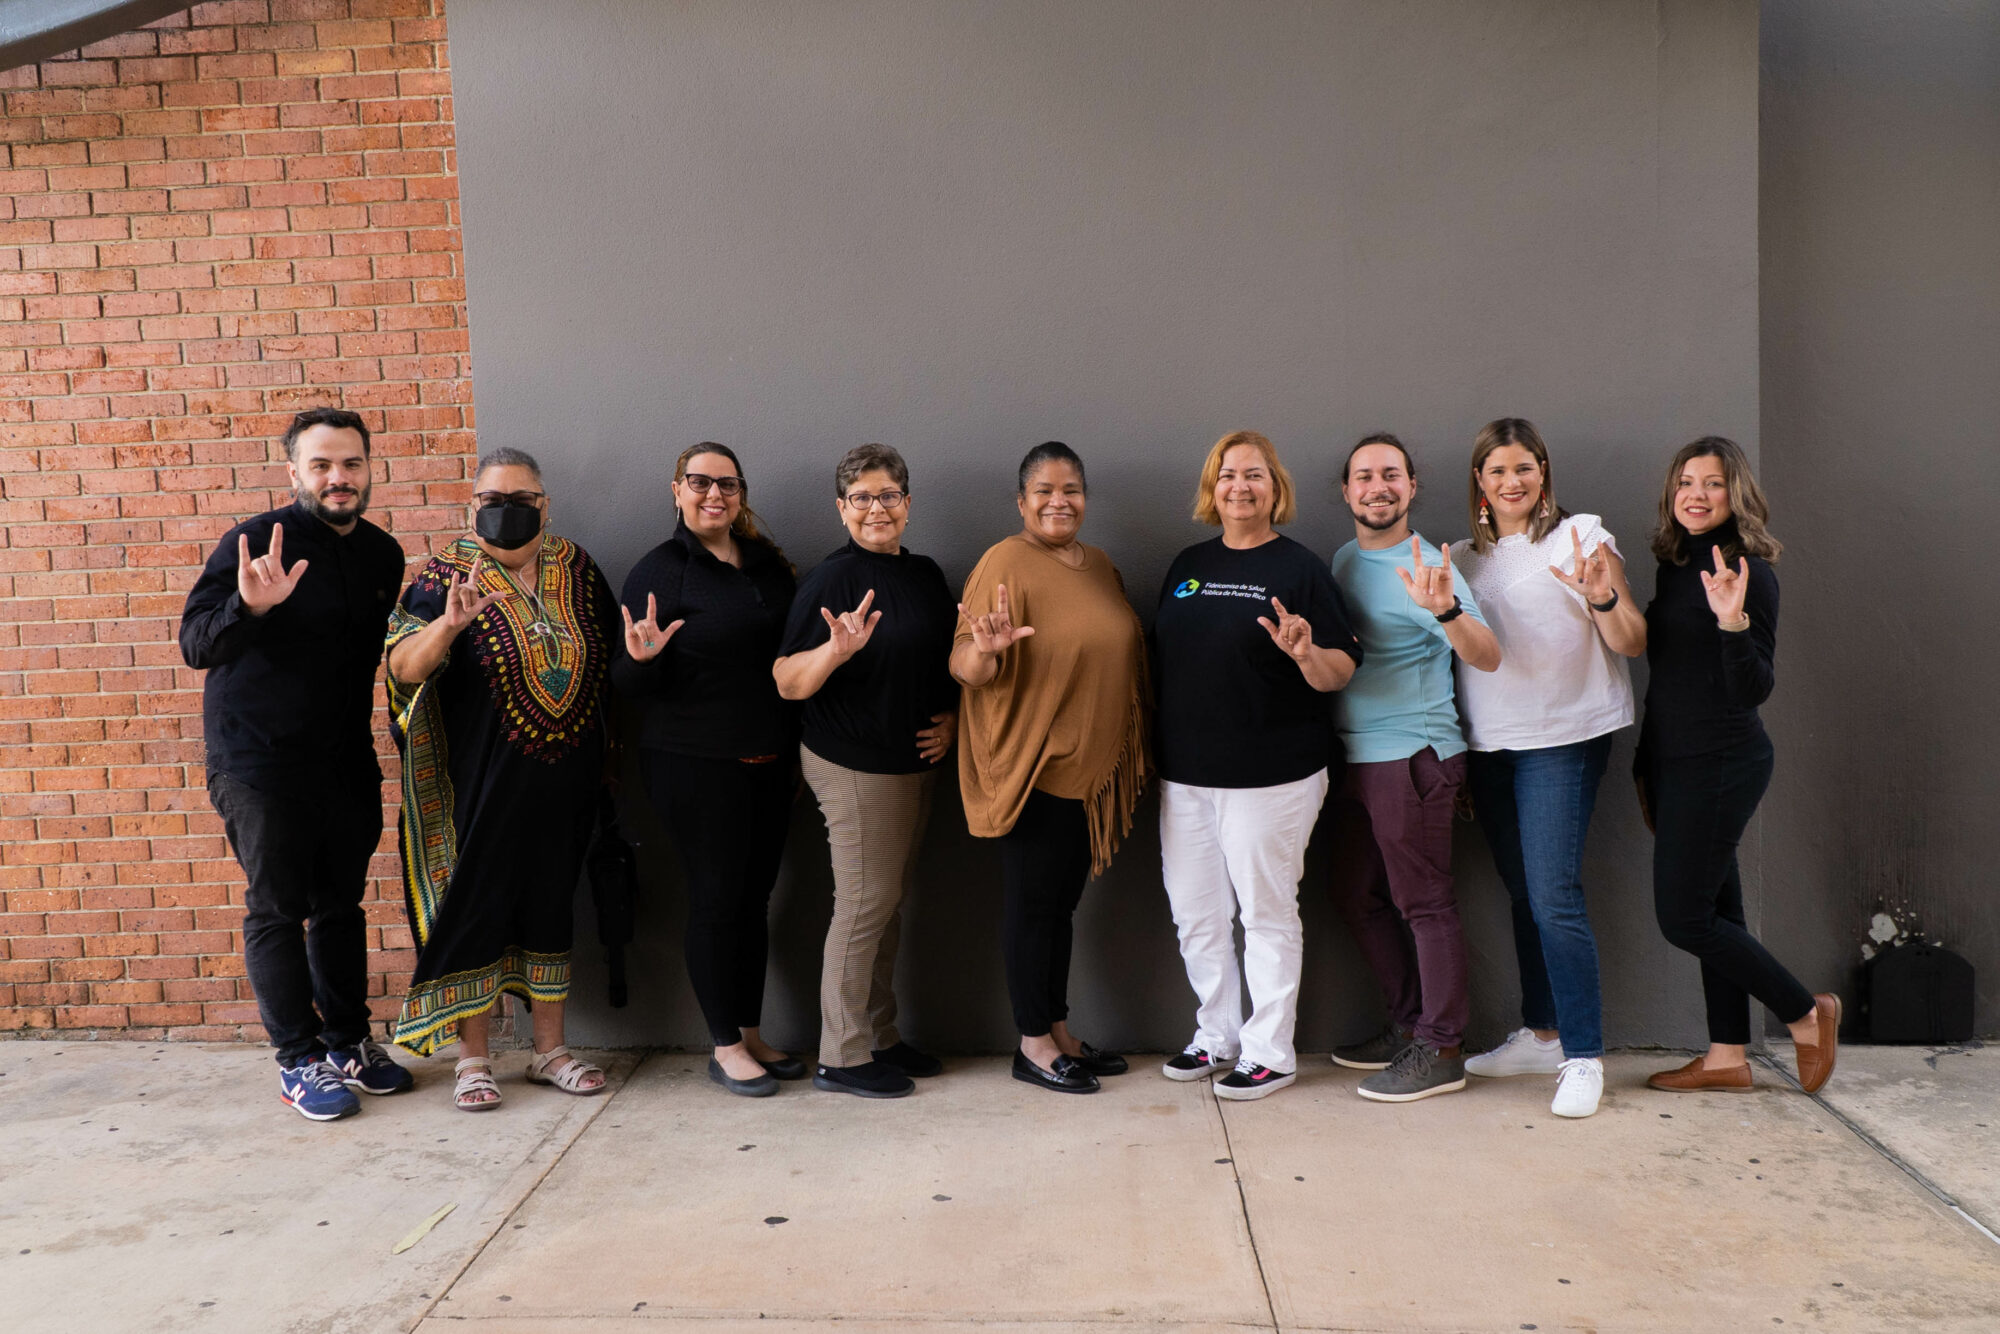 Picture of 9 people from the Aqui Nos Cuidamos team and community leaders standing in from of a wall and doing the "I love you" sign in American Sign language.